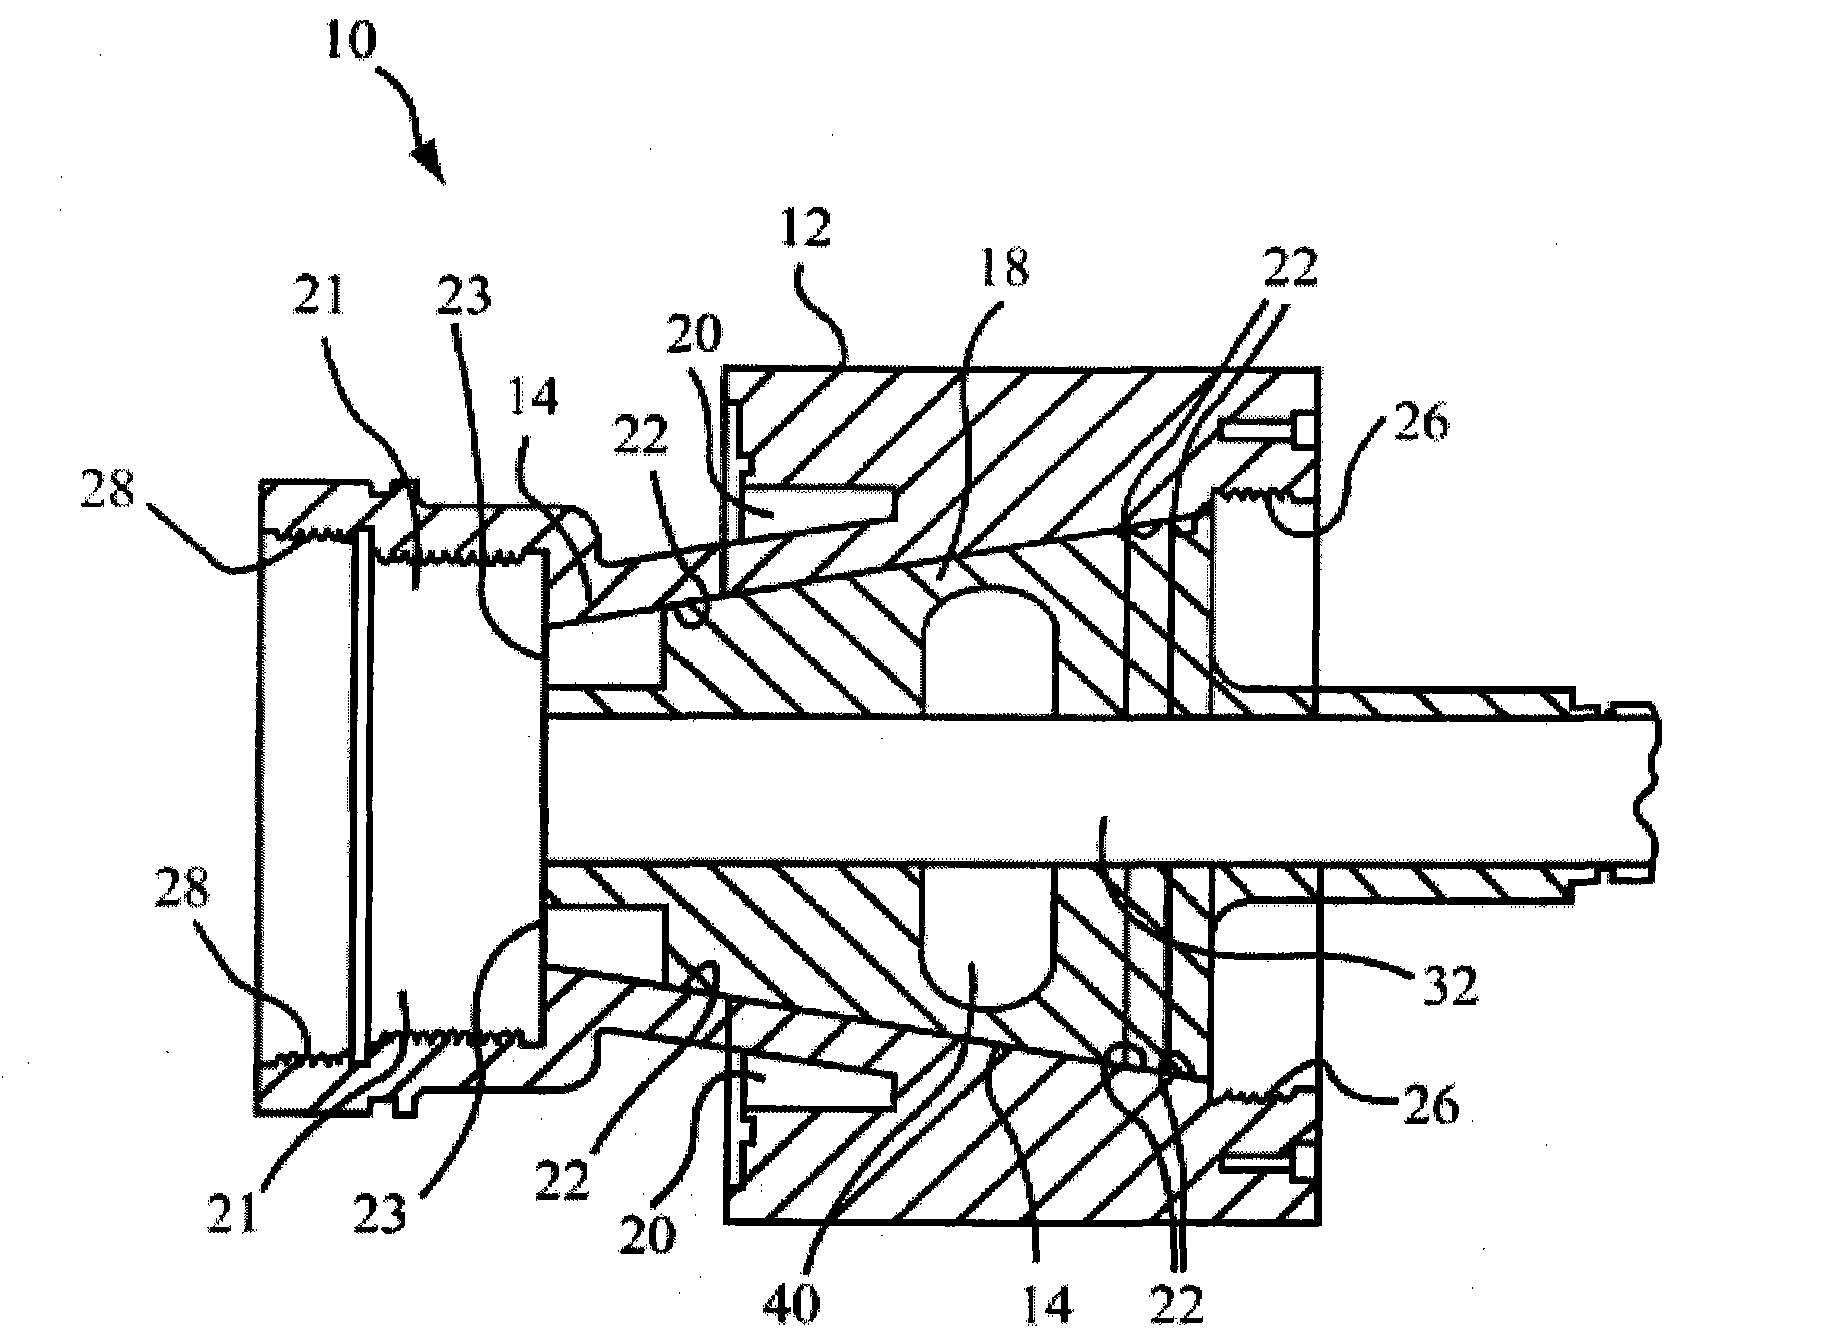 Linkage production method and device for rubber hose extrusion